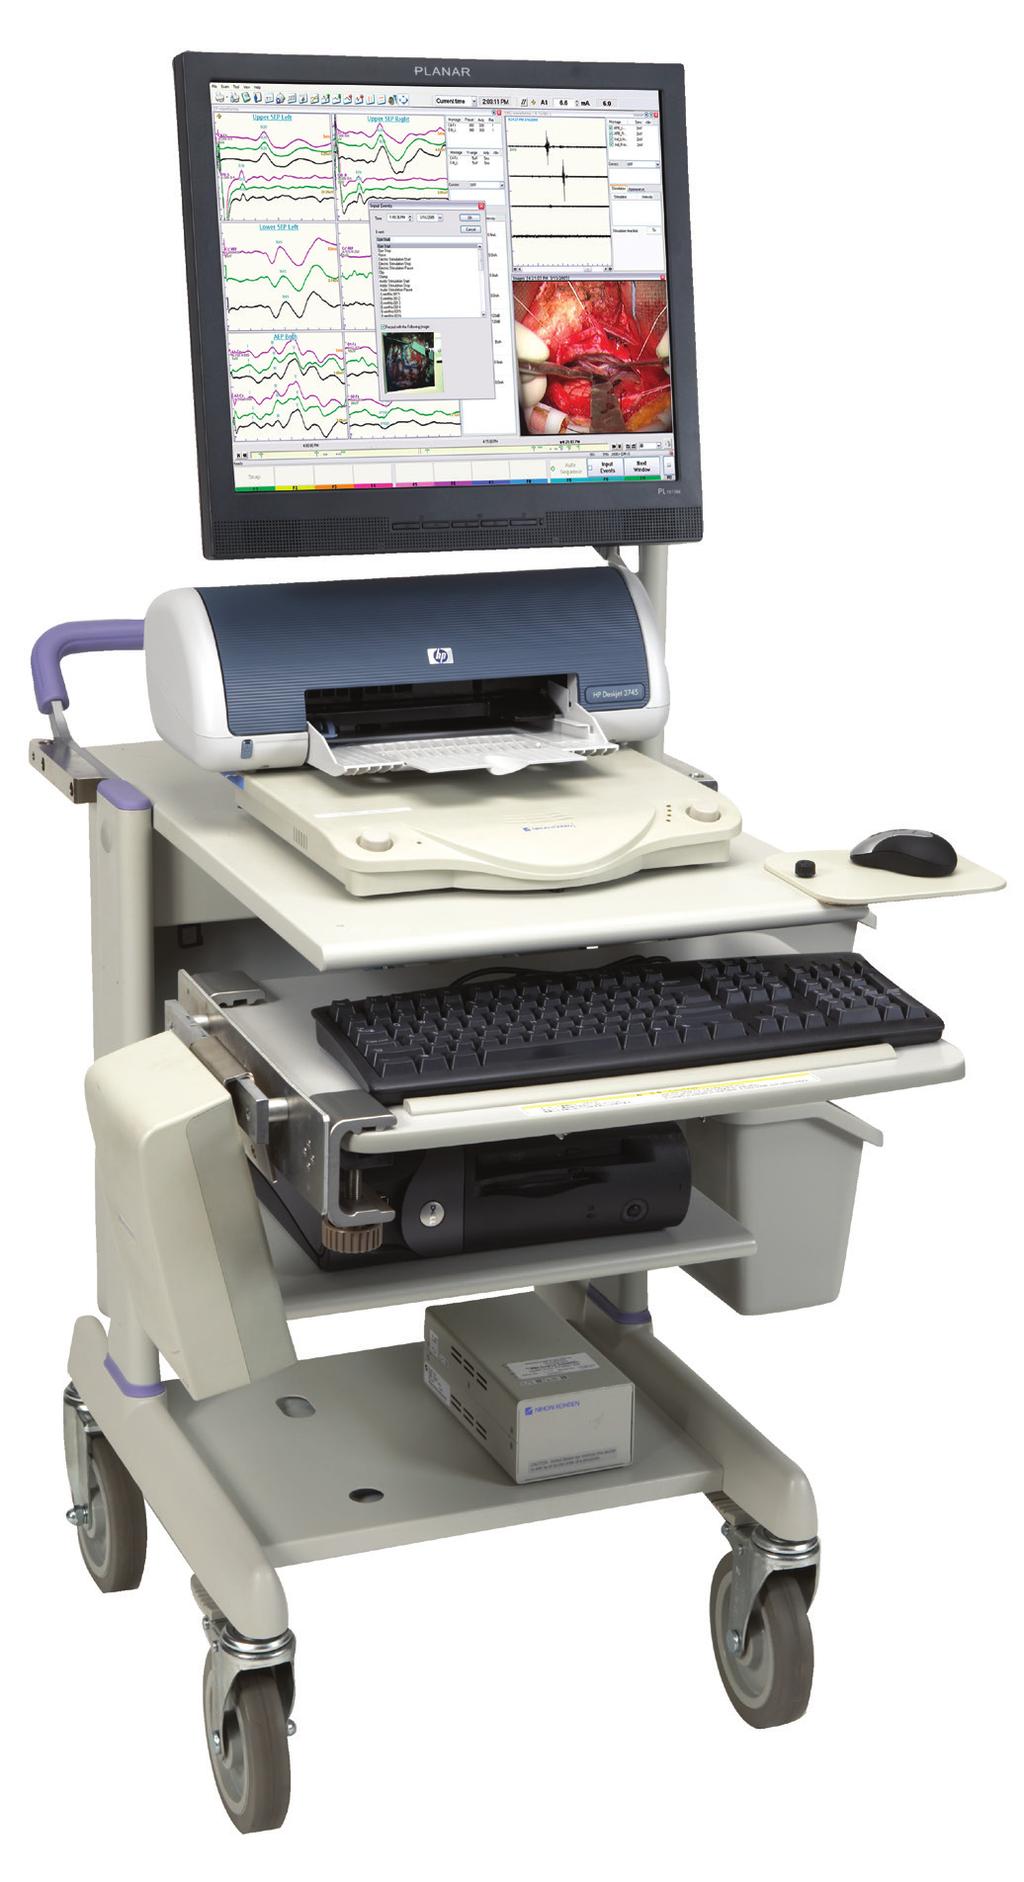 The Neuromaster MEE-000A is the latest addition to a long legacy of Nihon Kohden intra-operative monitoring systems offering the most flexible and comprehensive recording